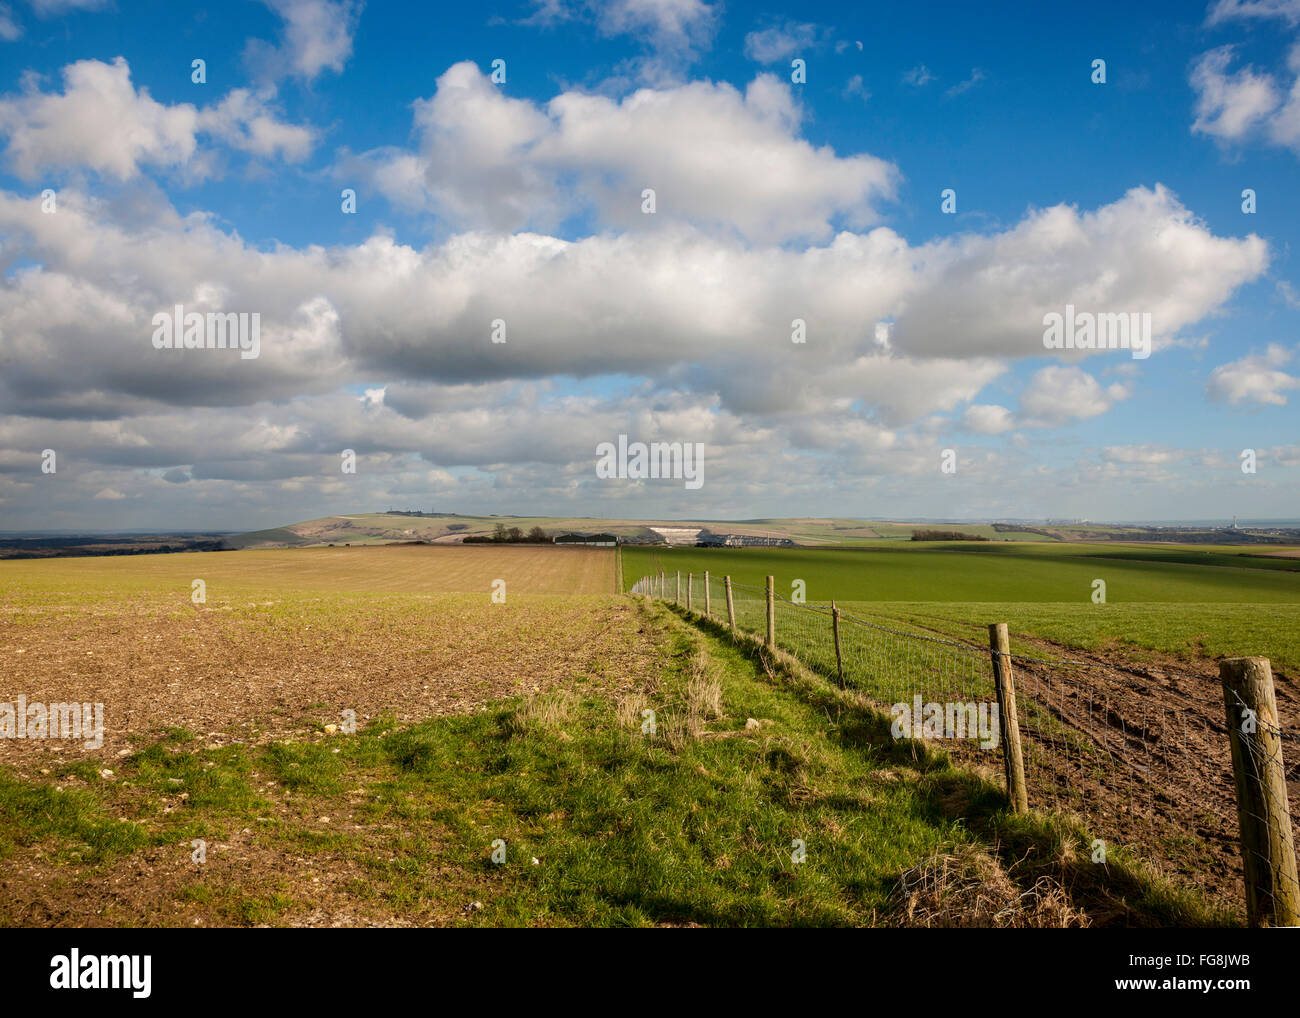 South Downs National Park, Steyning ciotola in inverno Foto Stock